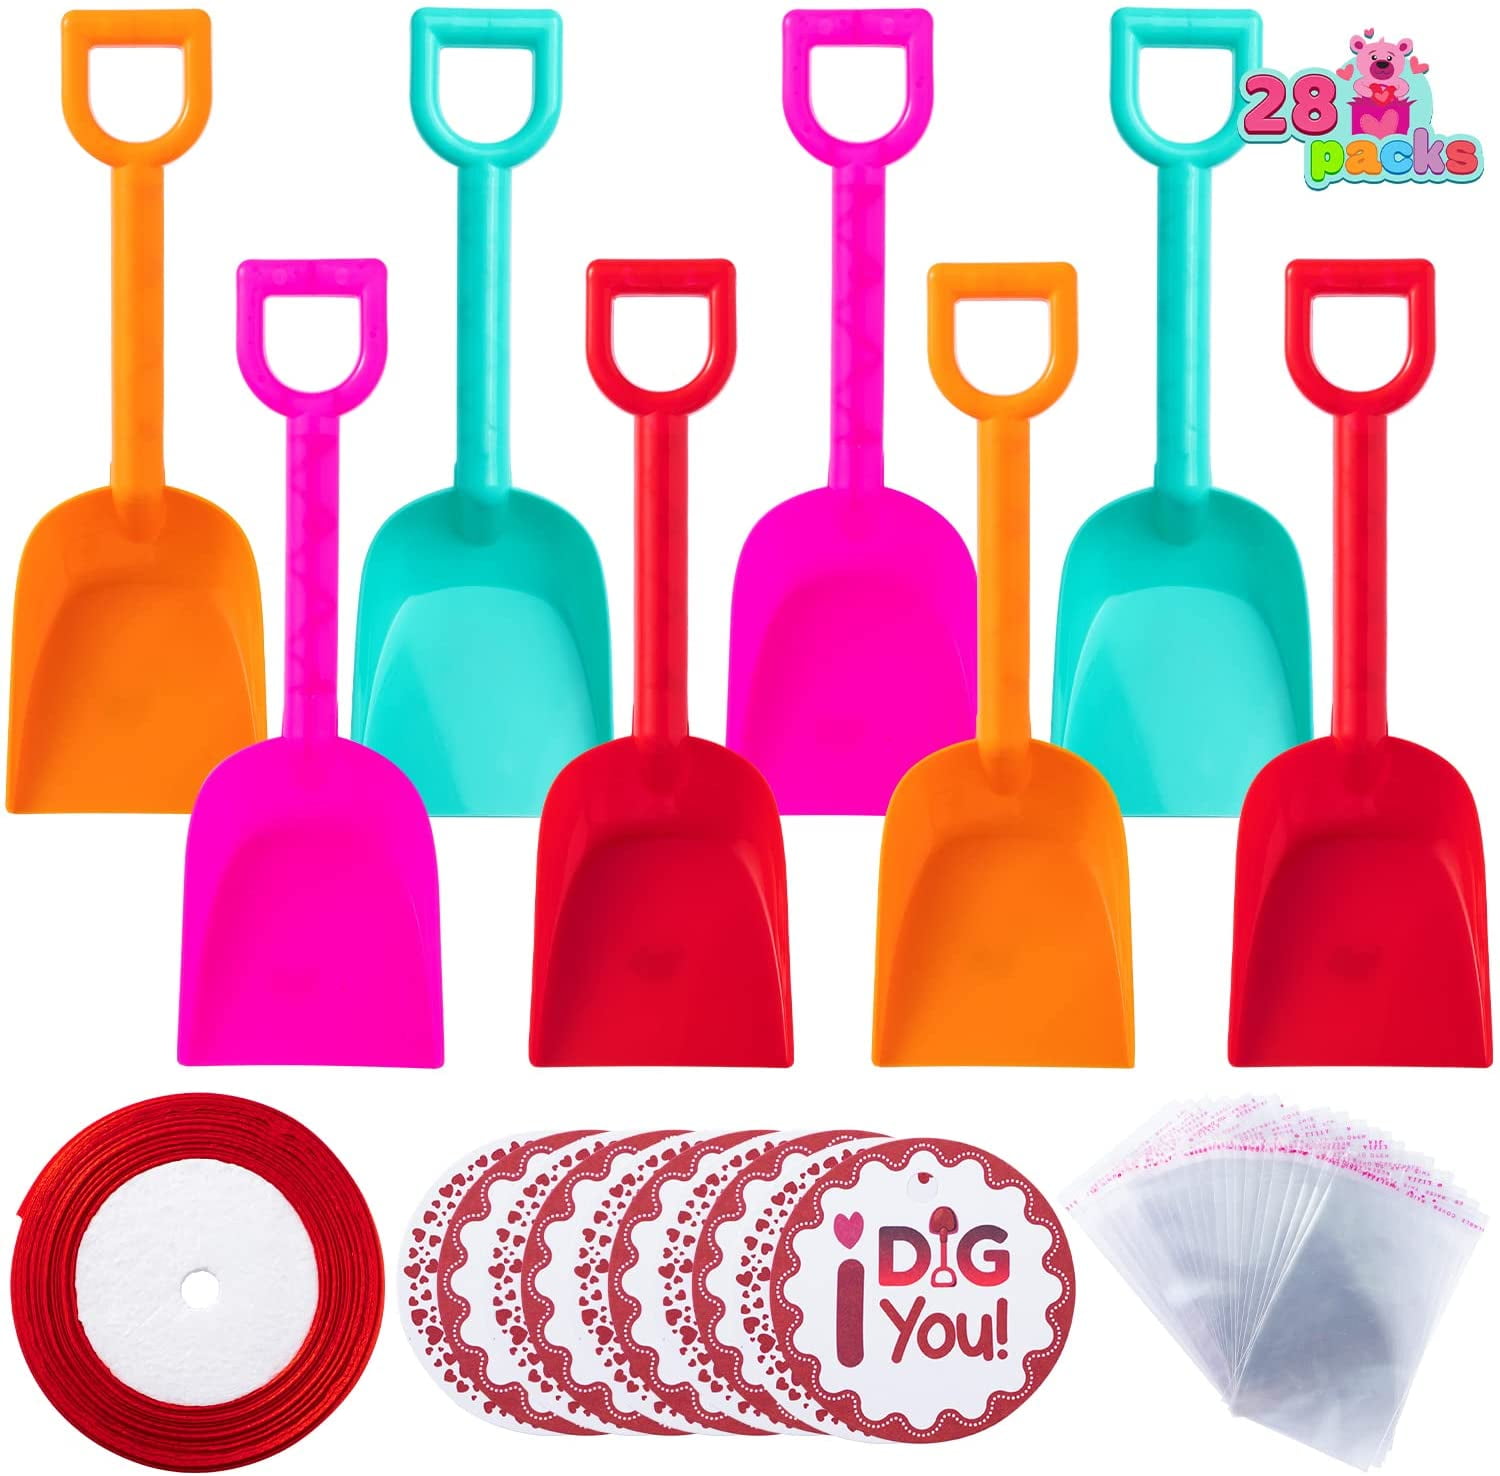 20 Pink Toy Shovels and 20 "I Dig You" Stickers Valentine's Day Party Favors* 